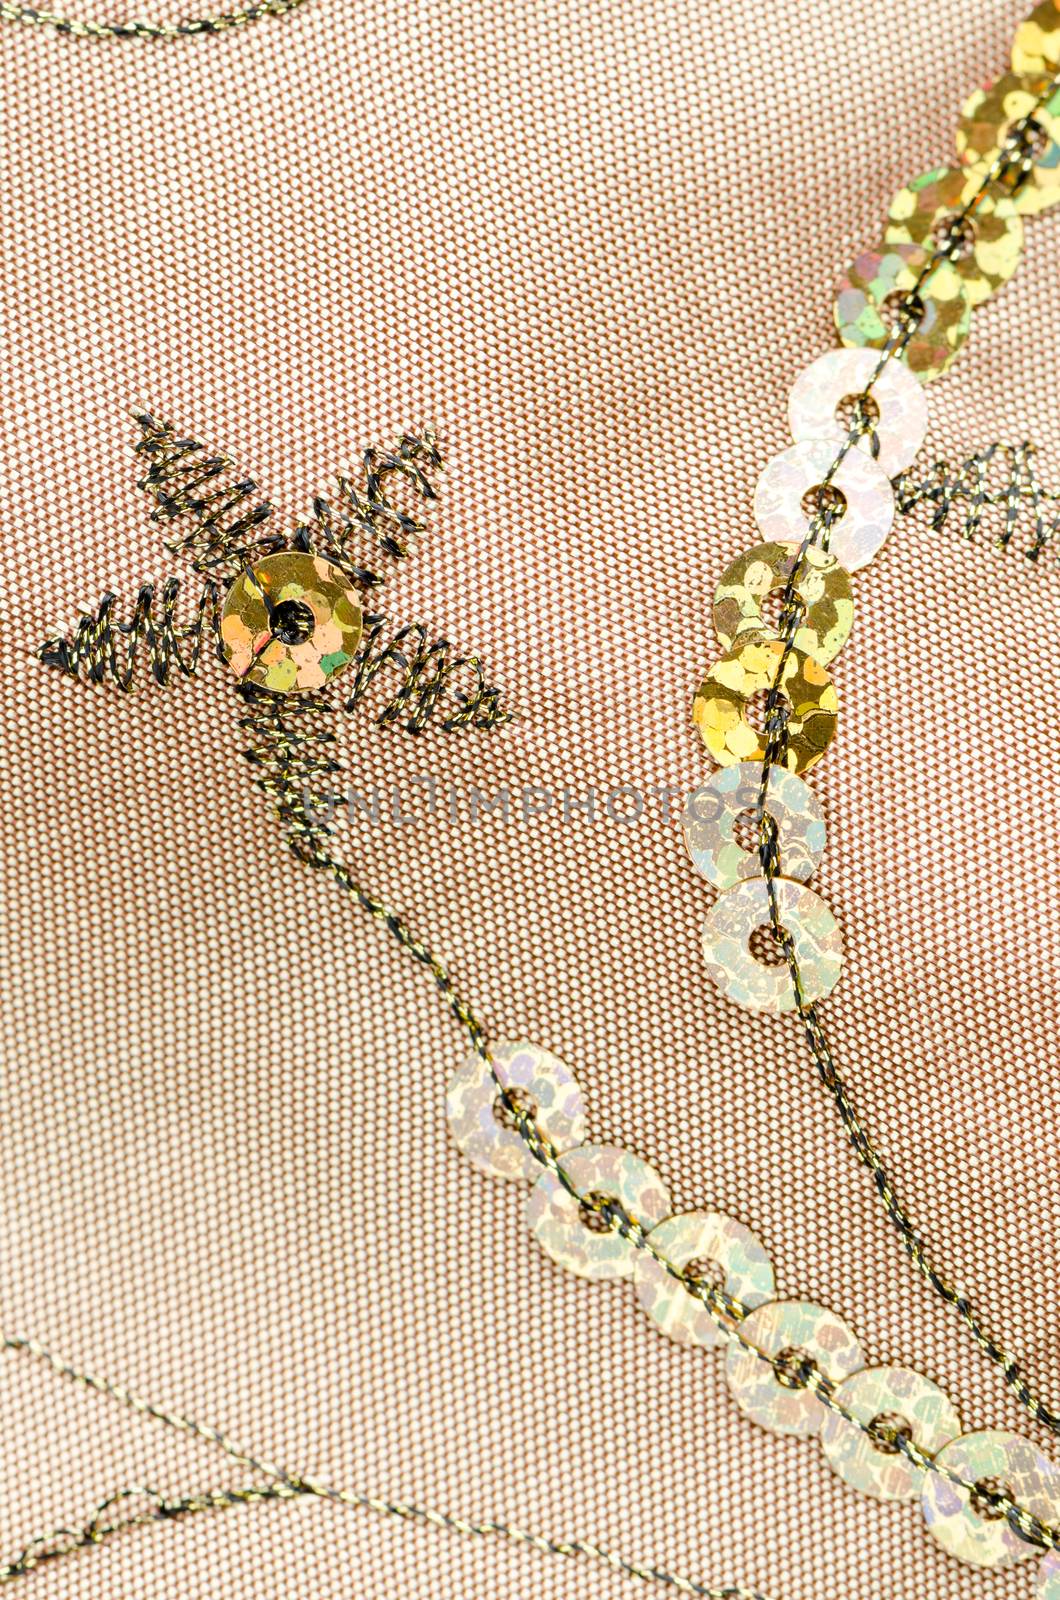 Fabric texture with spangles, sequin to background.